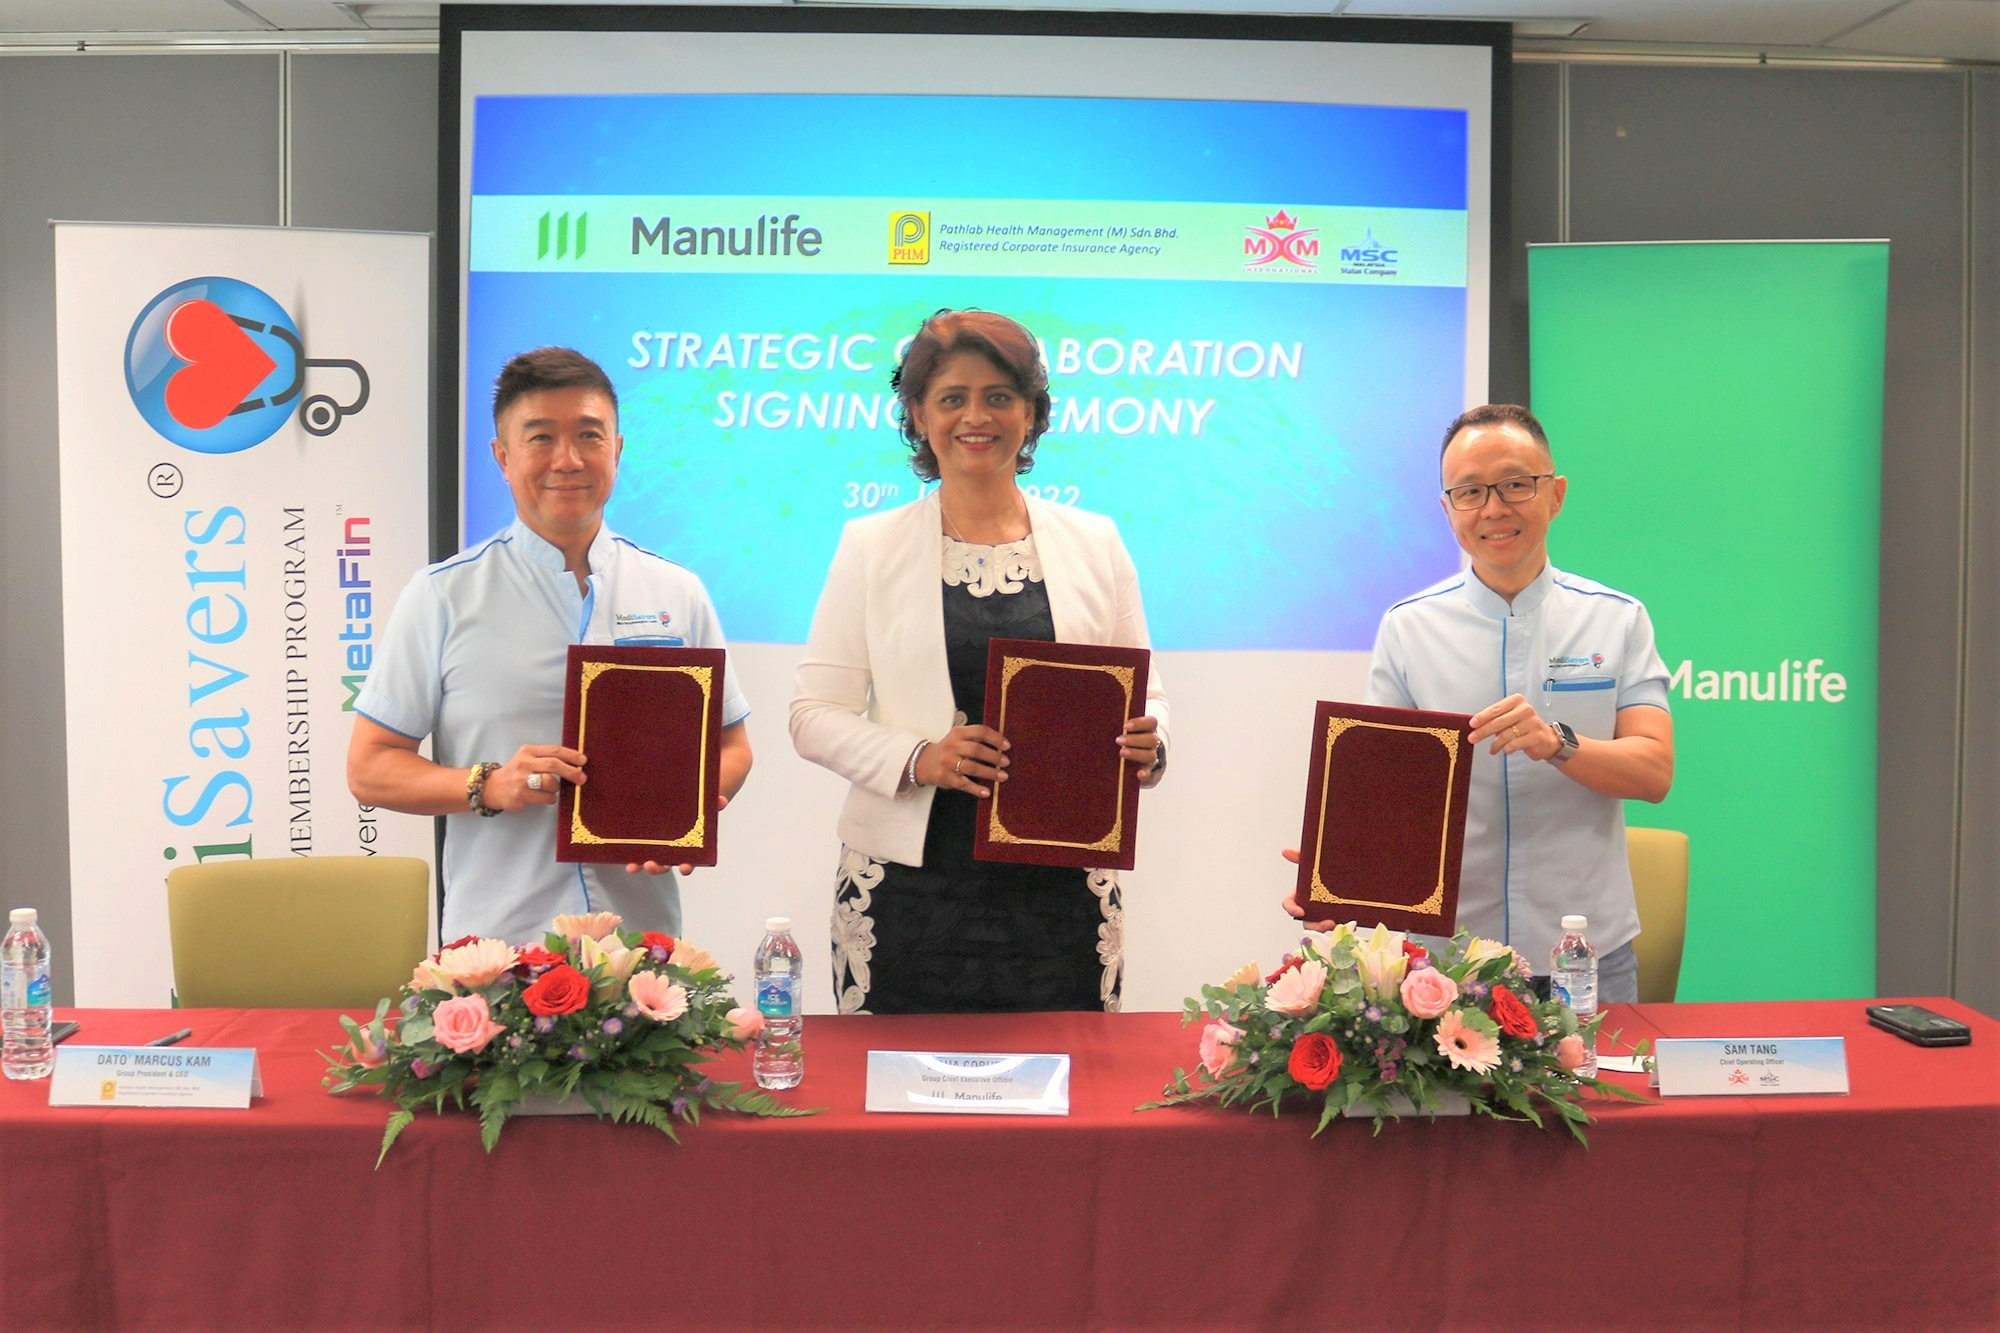 Group Term Life is the latest collaboration between MediSavers and Manulife Insurance